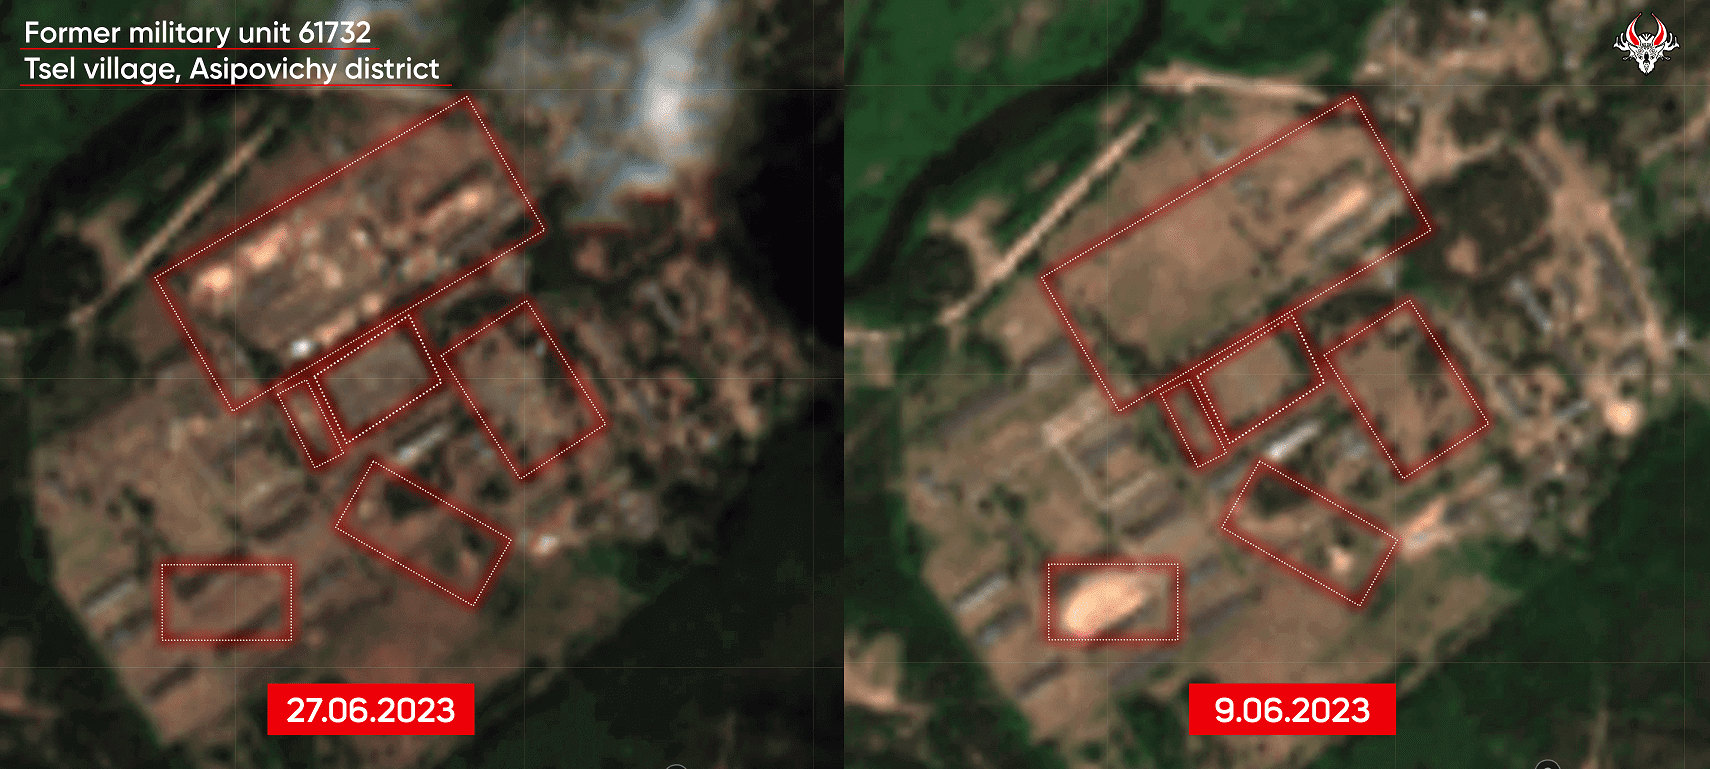 Changes on the territory of the former military unit 61732, Tsel village (Asipovichy district), June 27 and June 9